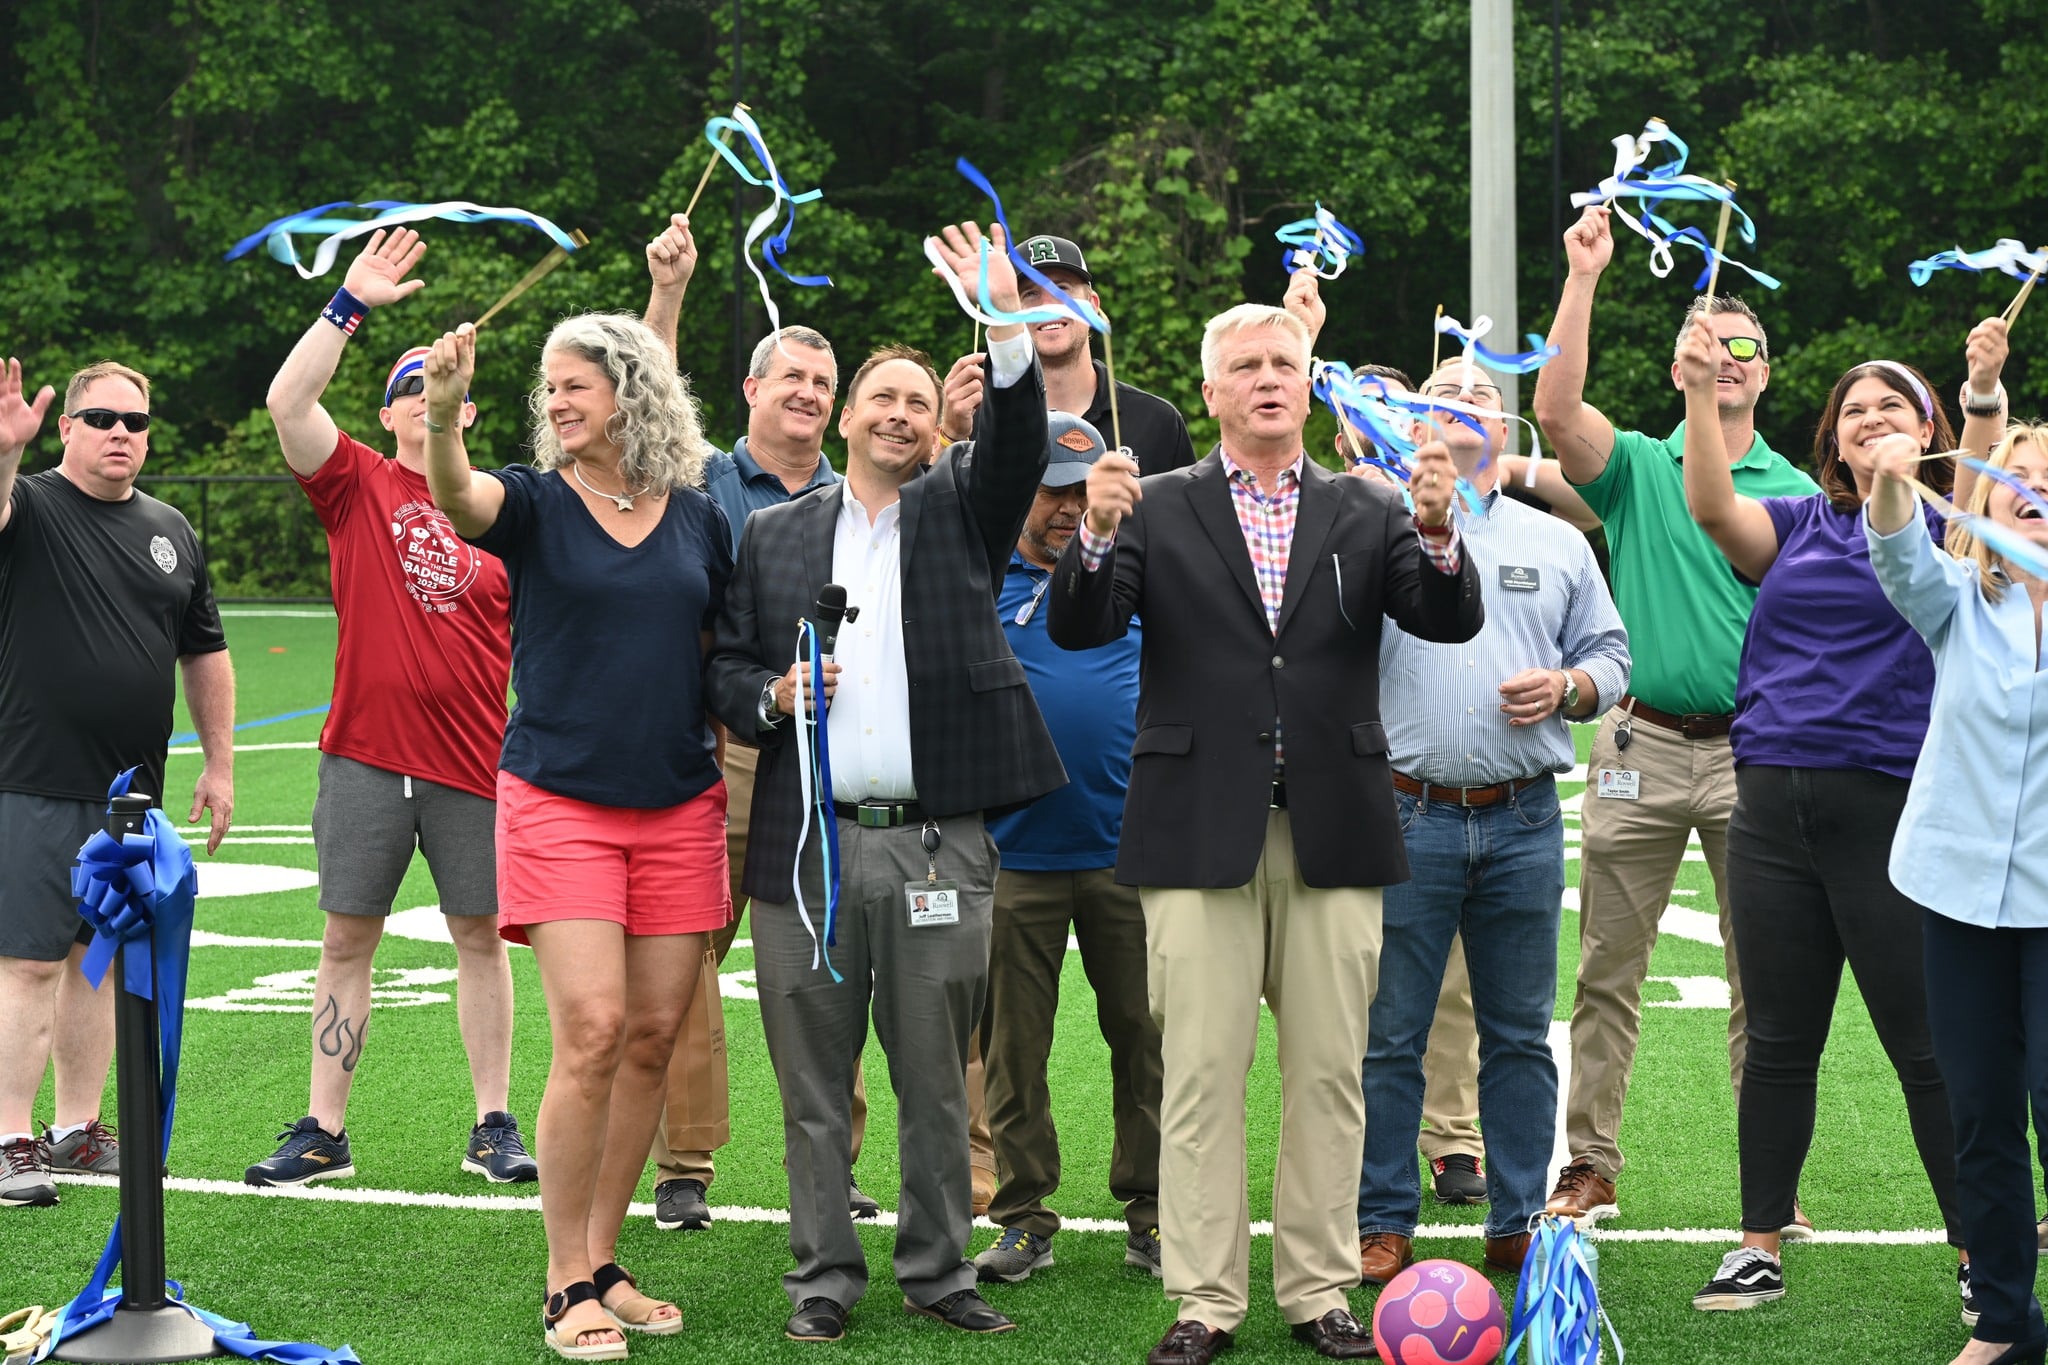 New turf fields installed at East Roswell Park